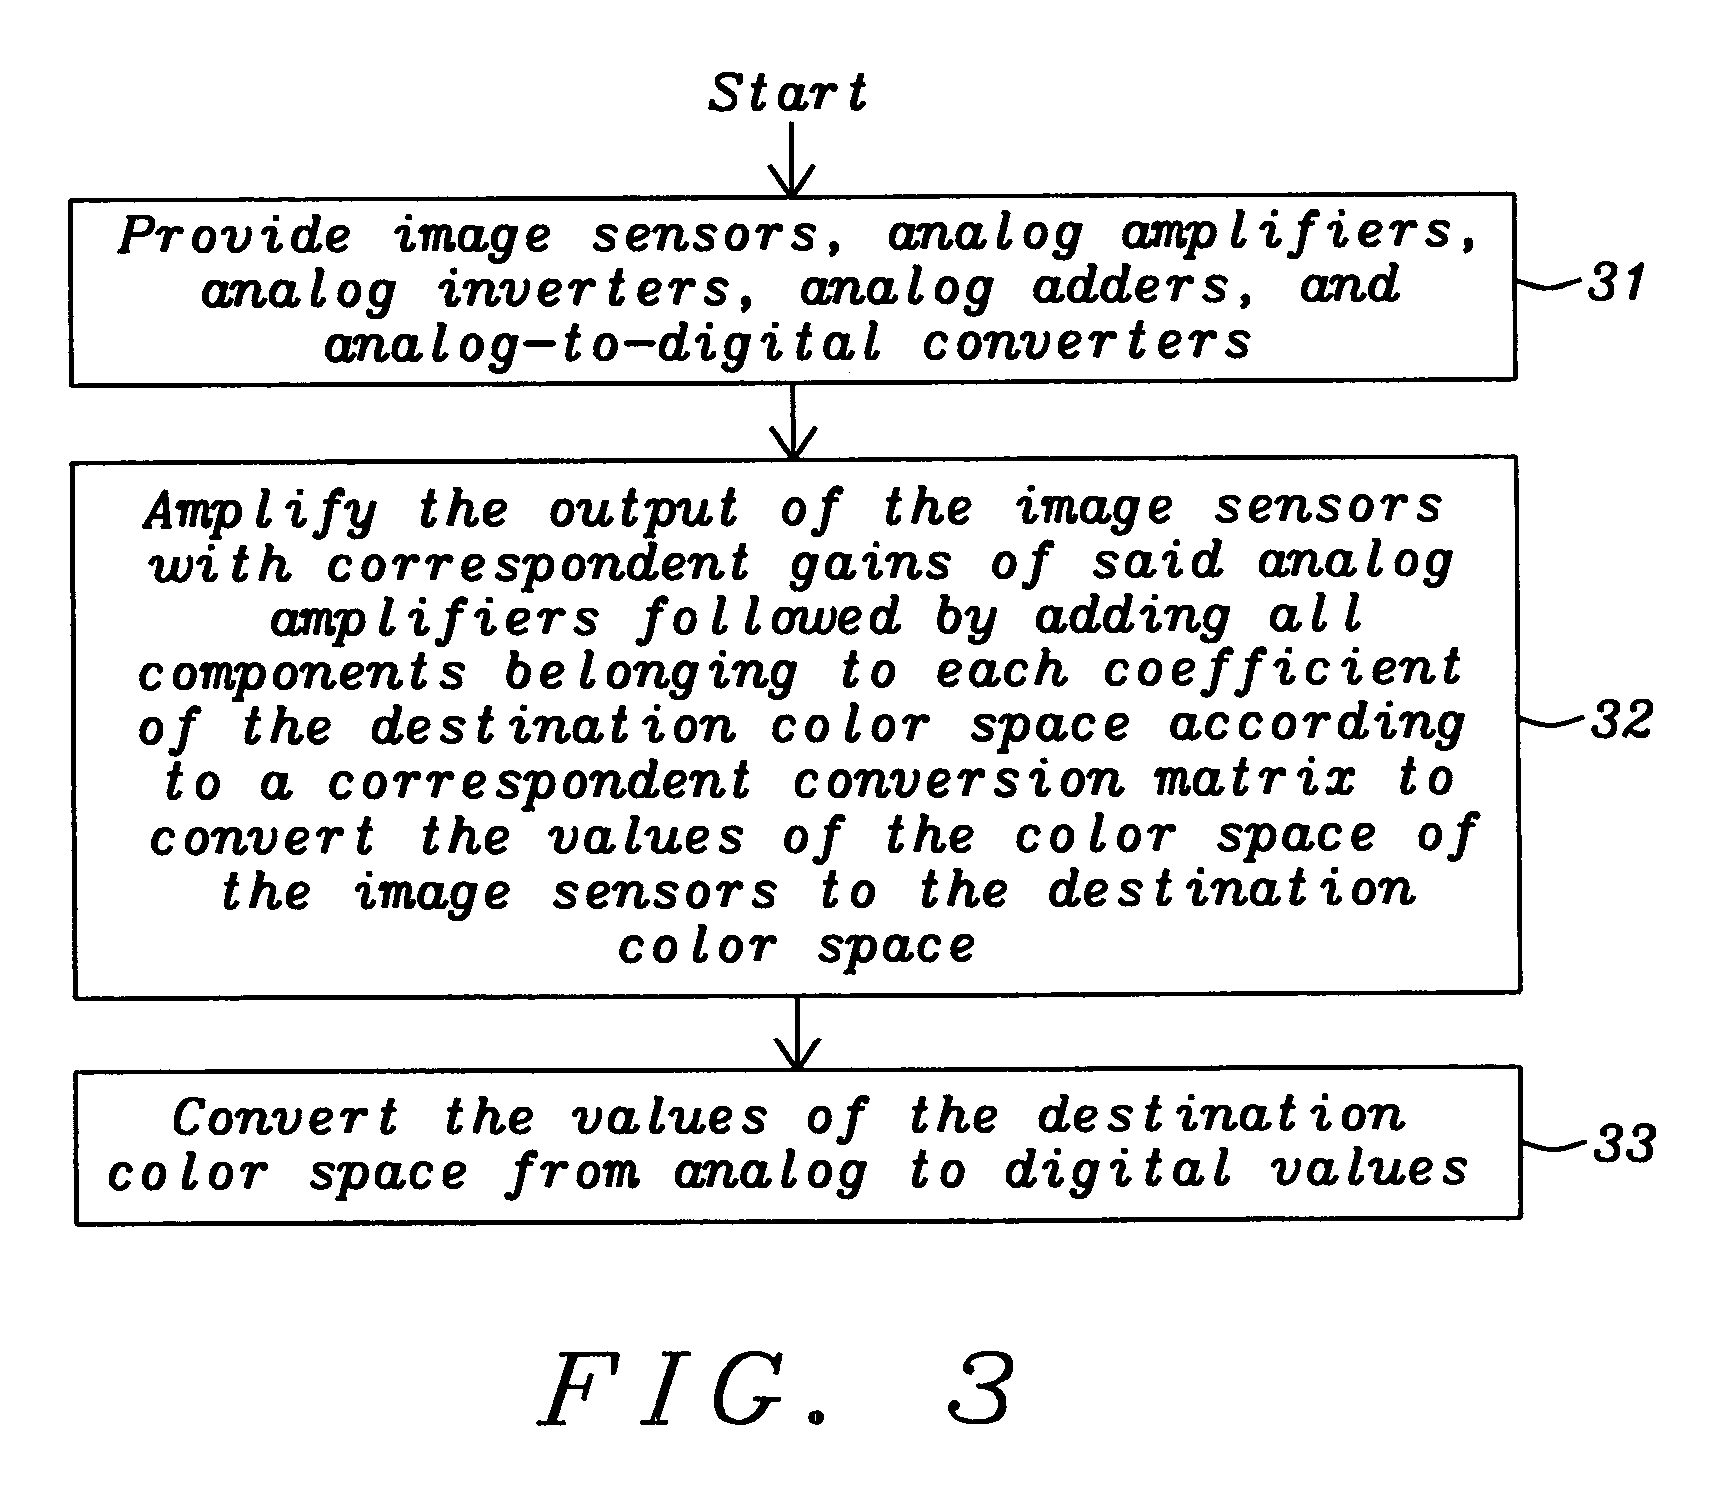 Color space conversion in the analog domain